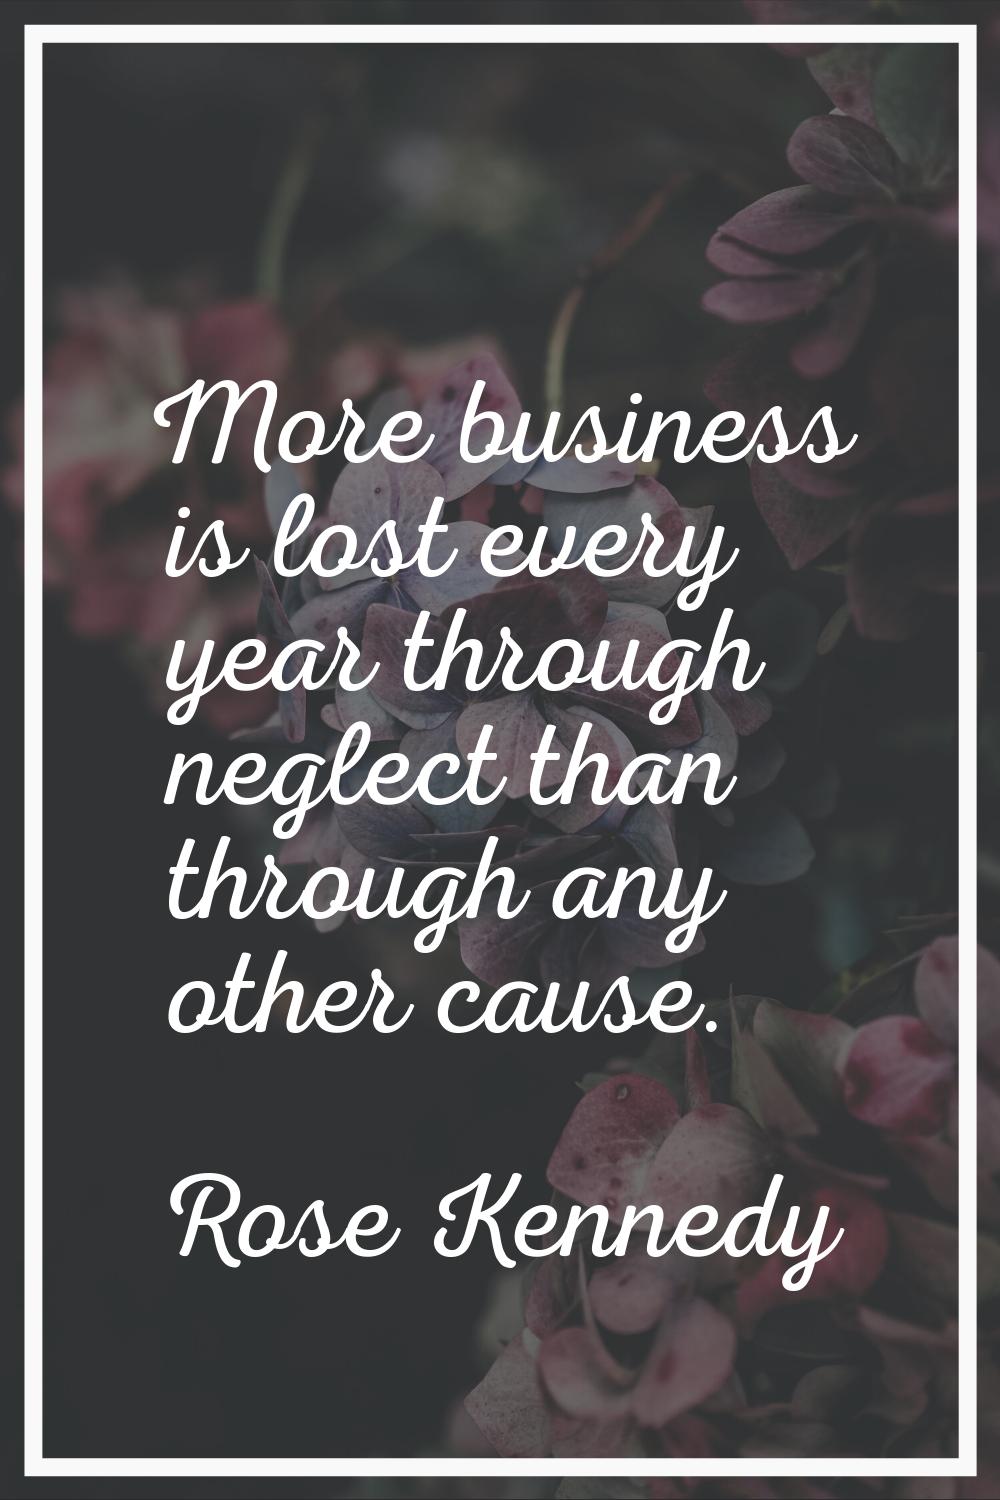 More business is lost every year through neglect than through any other cause.